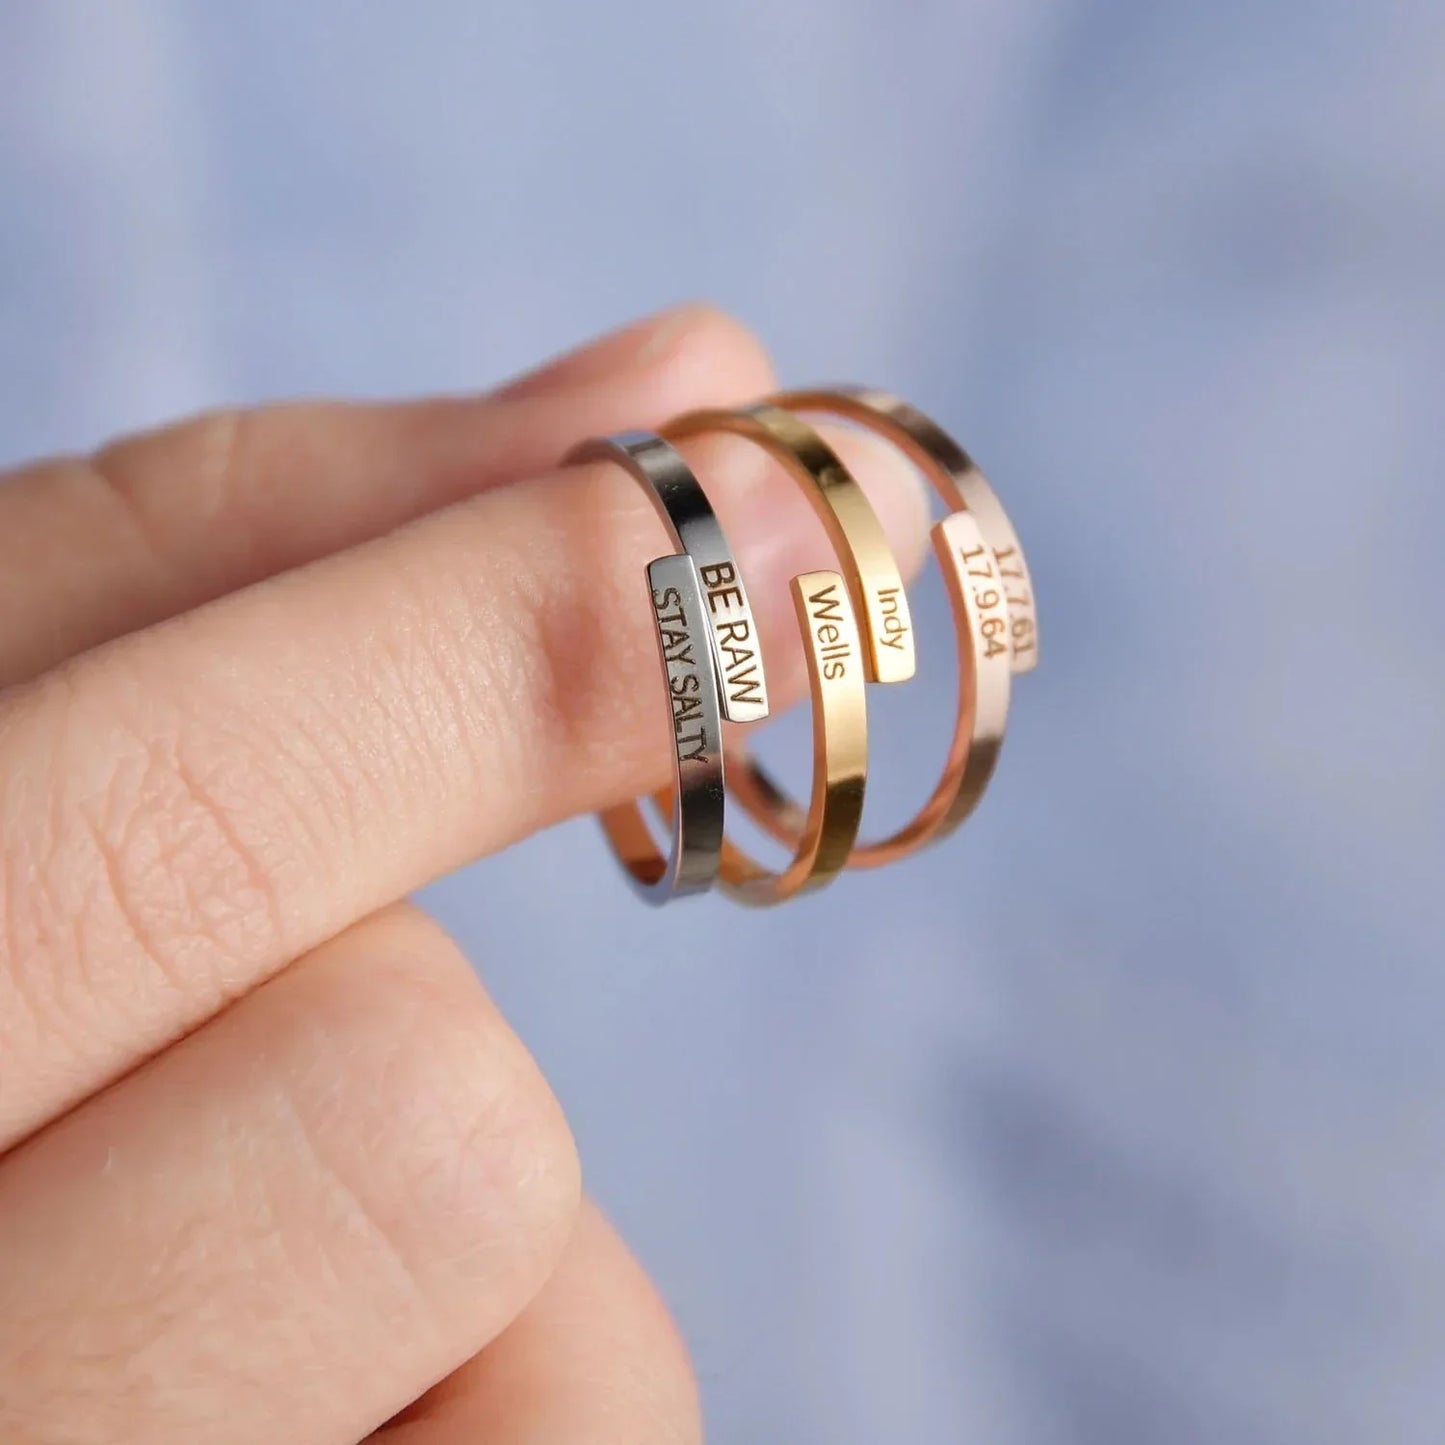 The Adjustable Engraved Ring